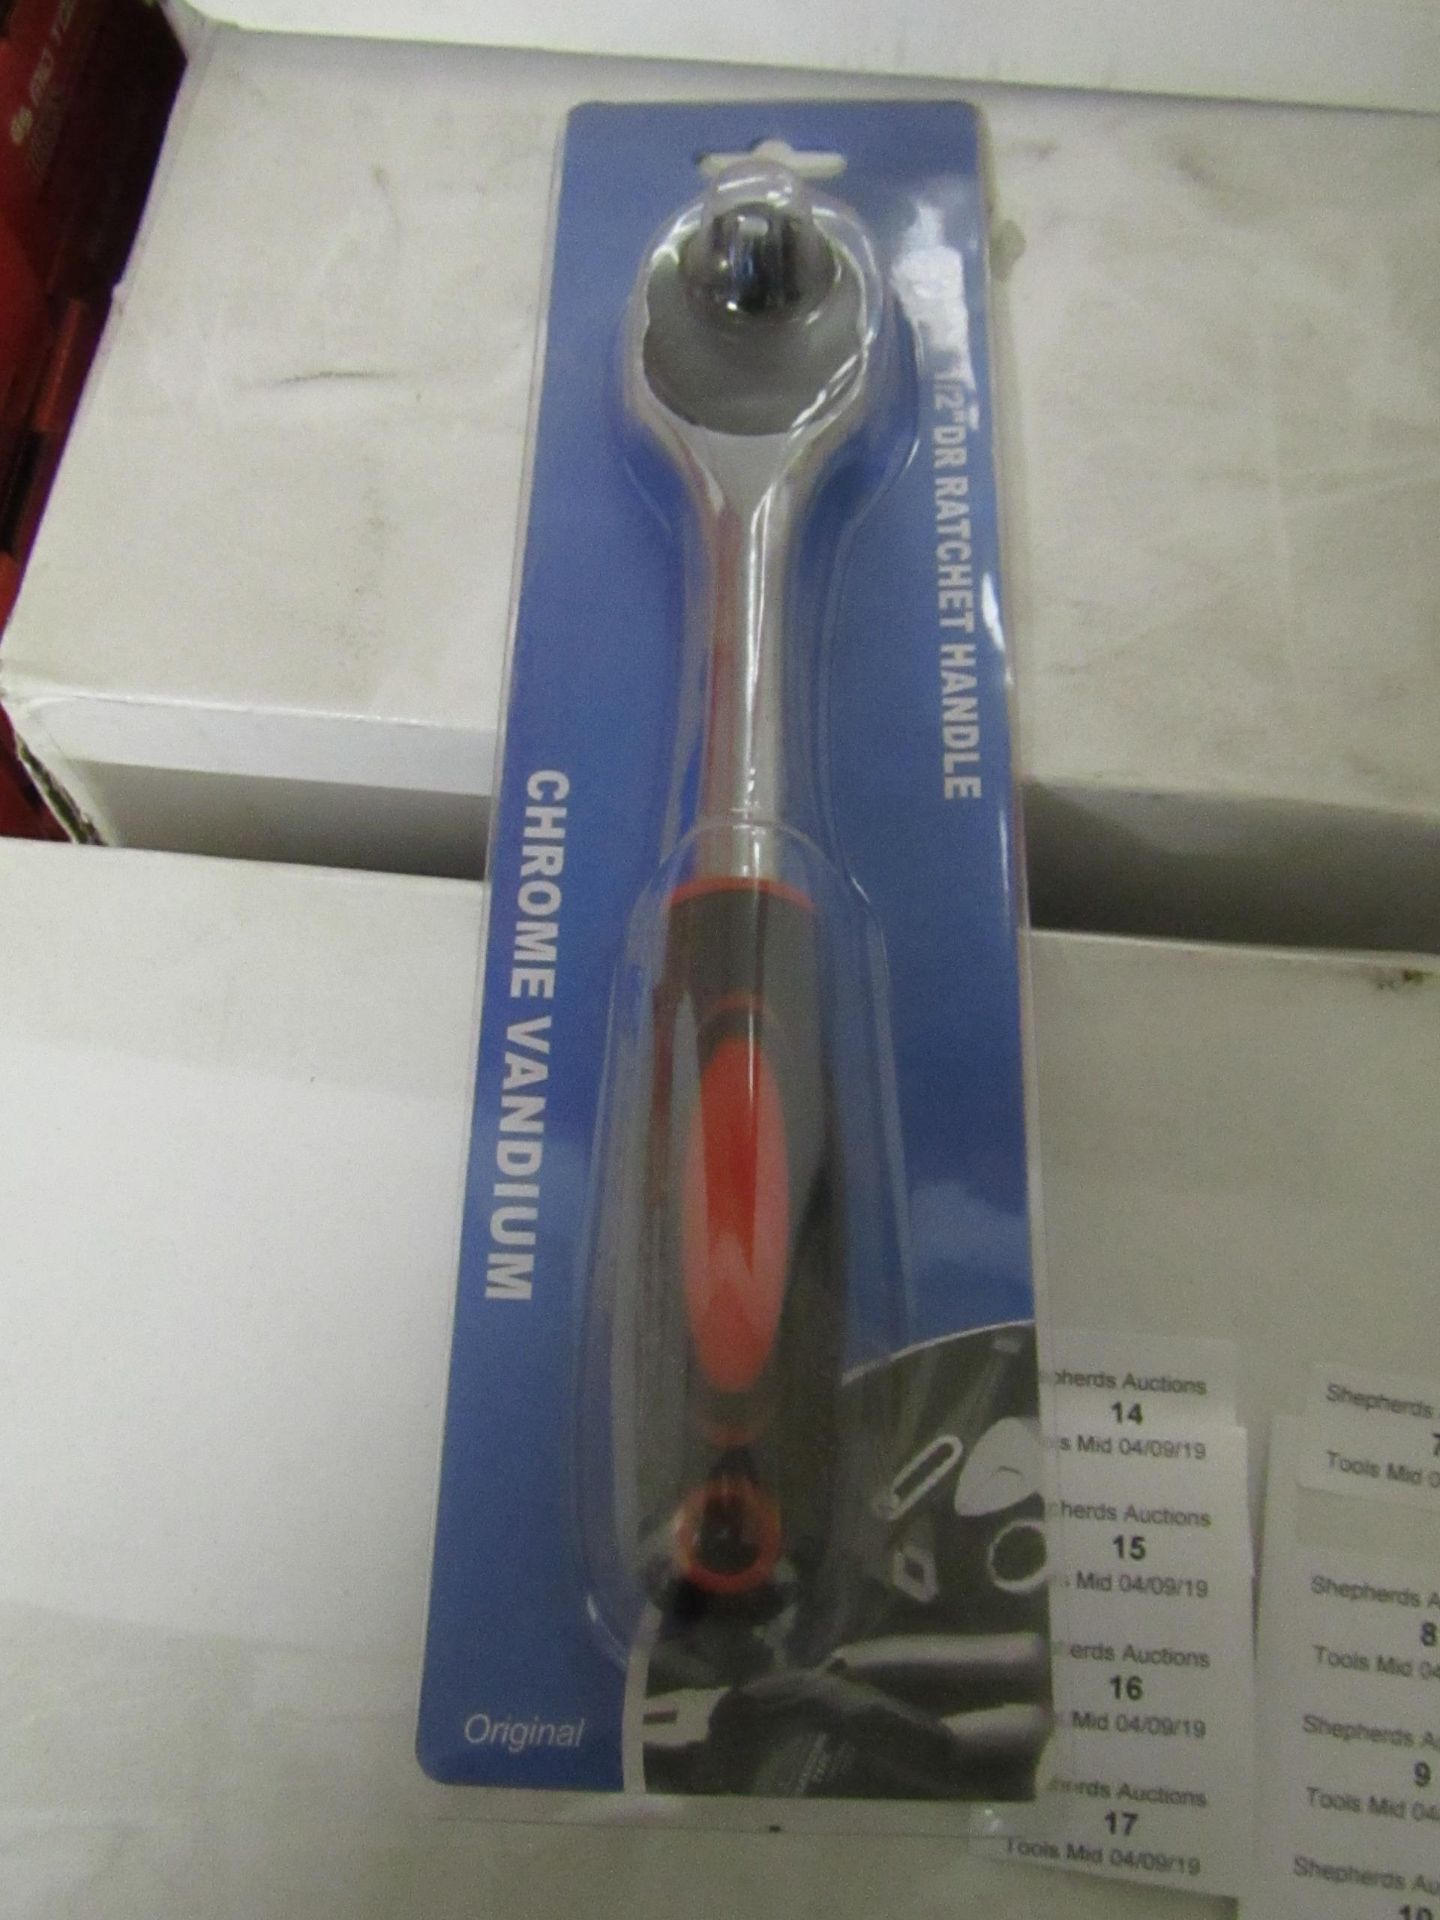 Chrome vandium 1/2" ratchet handle, new and packaged.